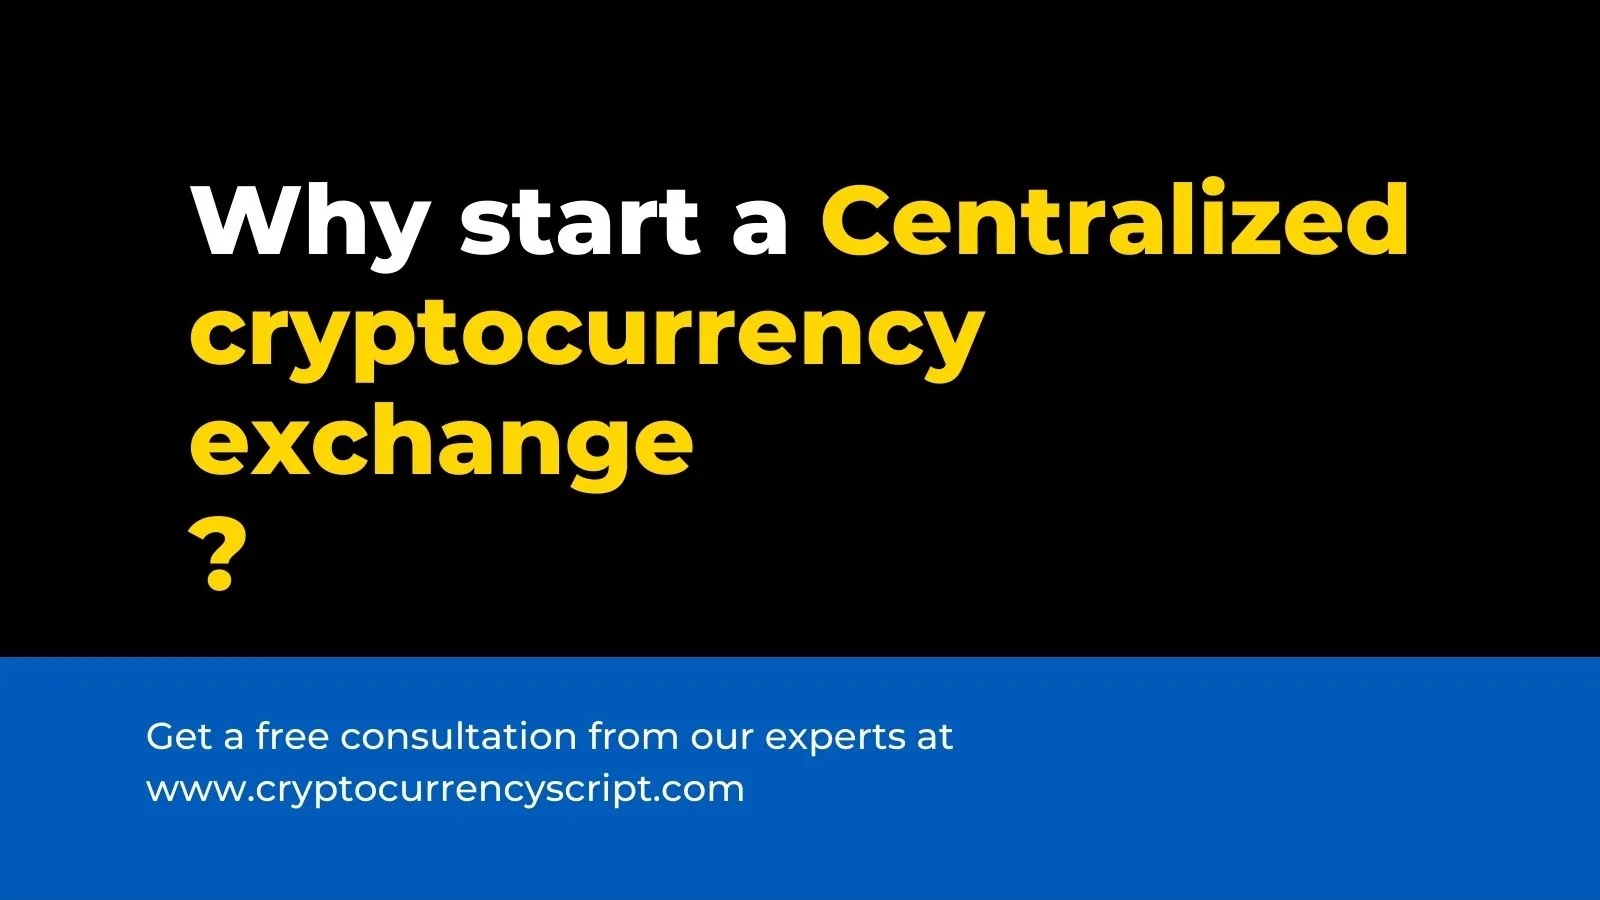 Why start a centralized cryptocurrency exchange?